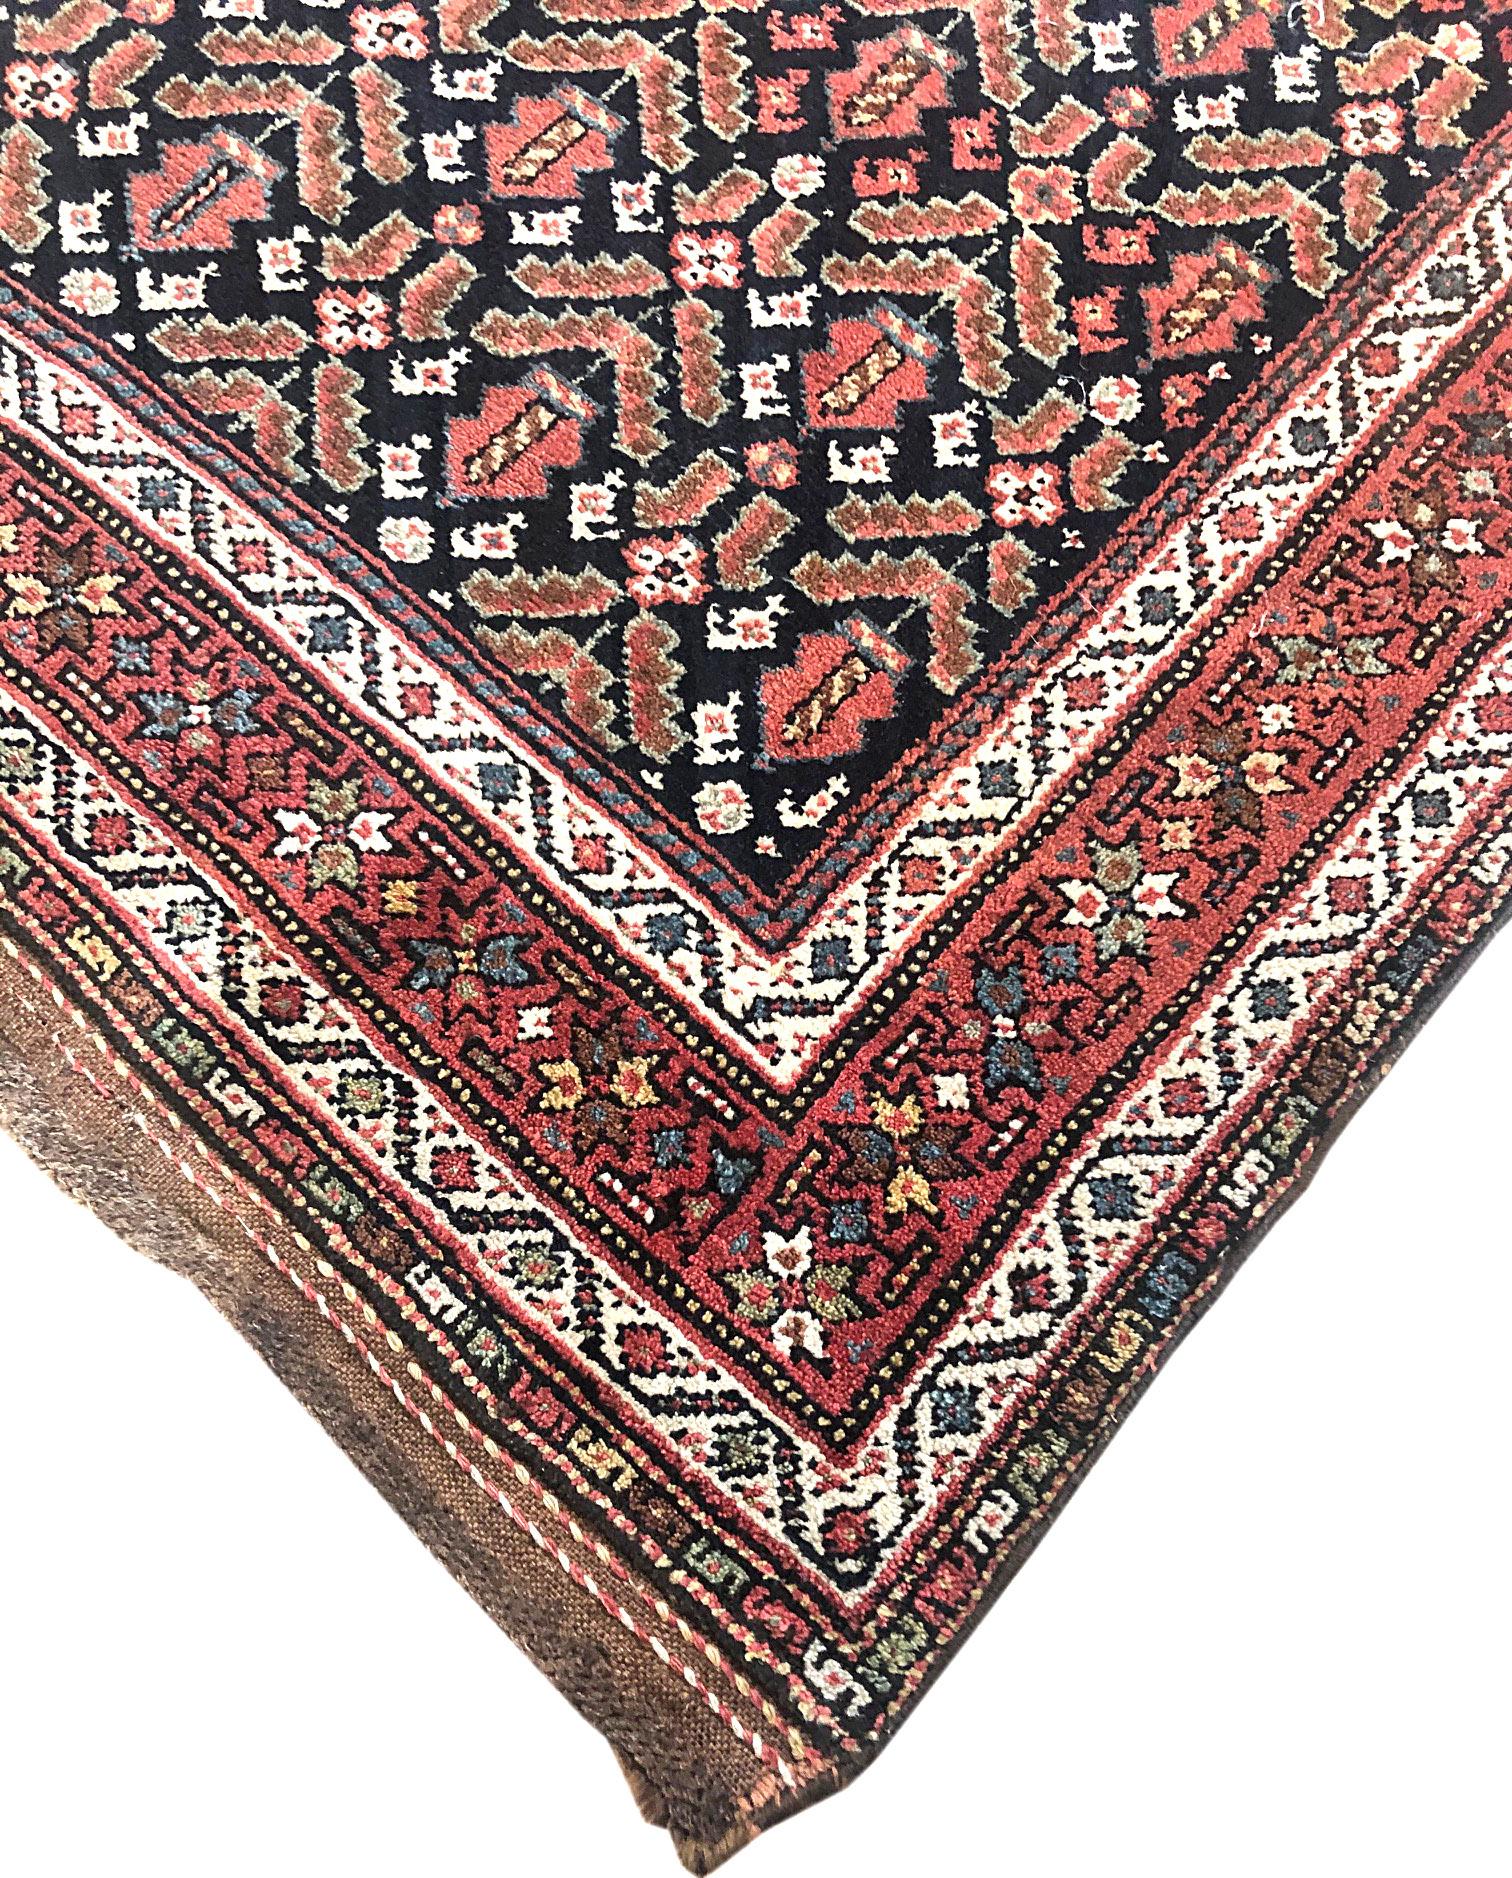 Authentic Persian Hand Knotted Antique Kurdish Rug, circa 1940 For Sale 2